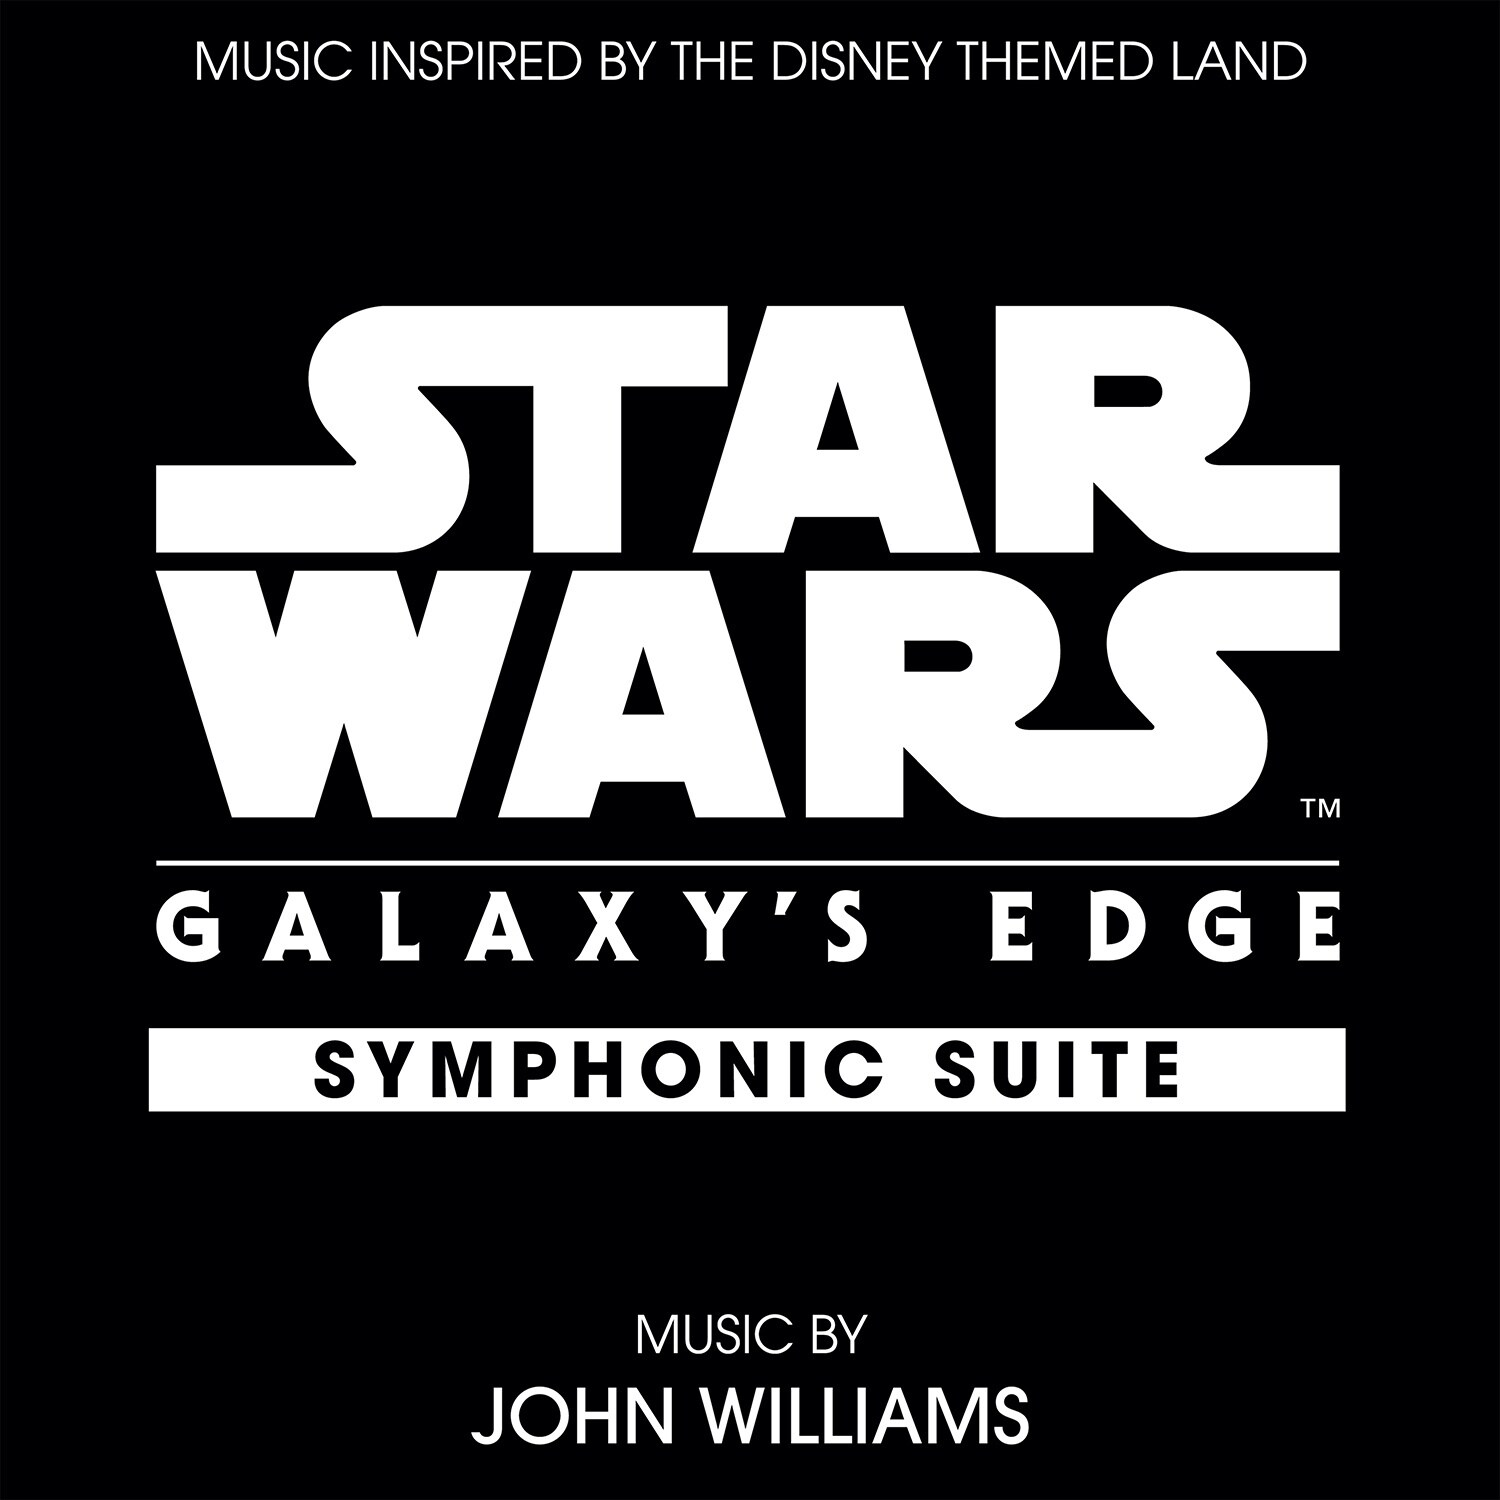 Single cover art for the Star Wars: Galaxy's Edge symphonic suite, composed by John Williams.